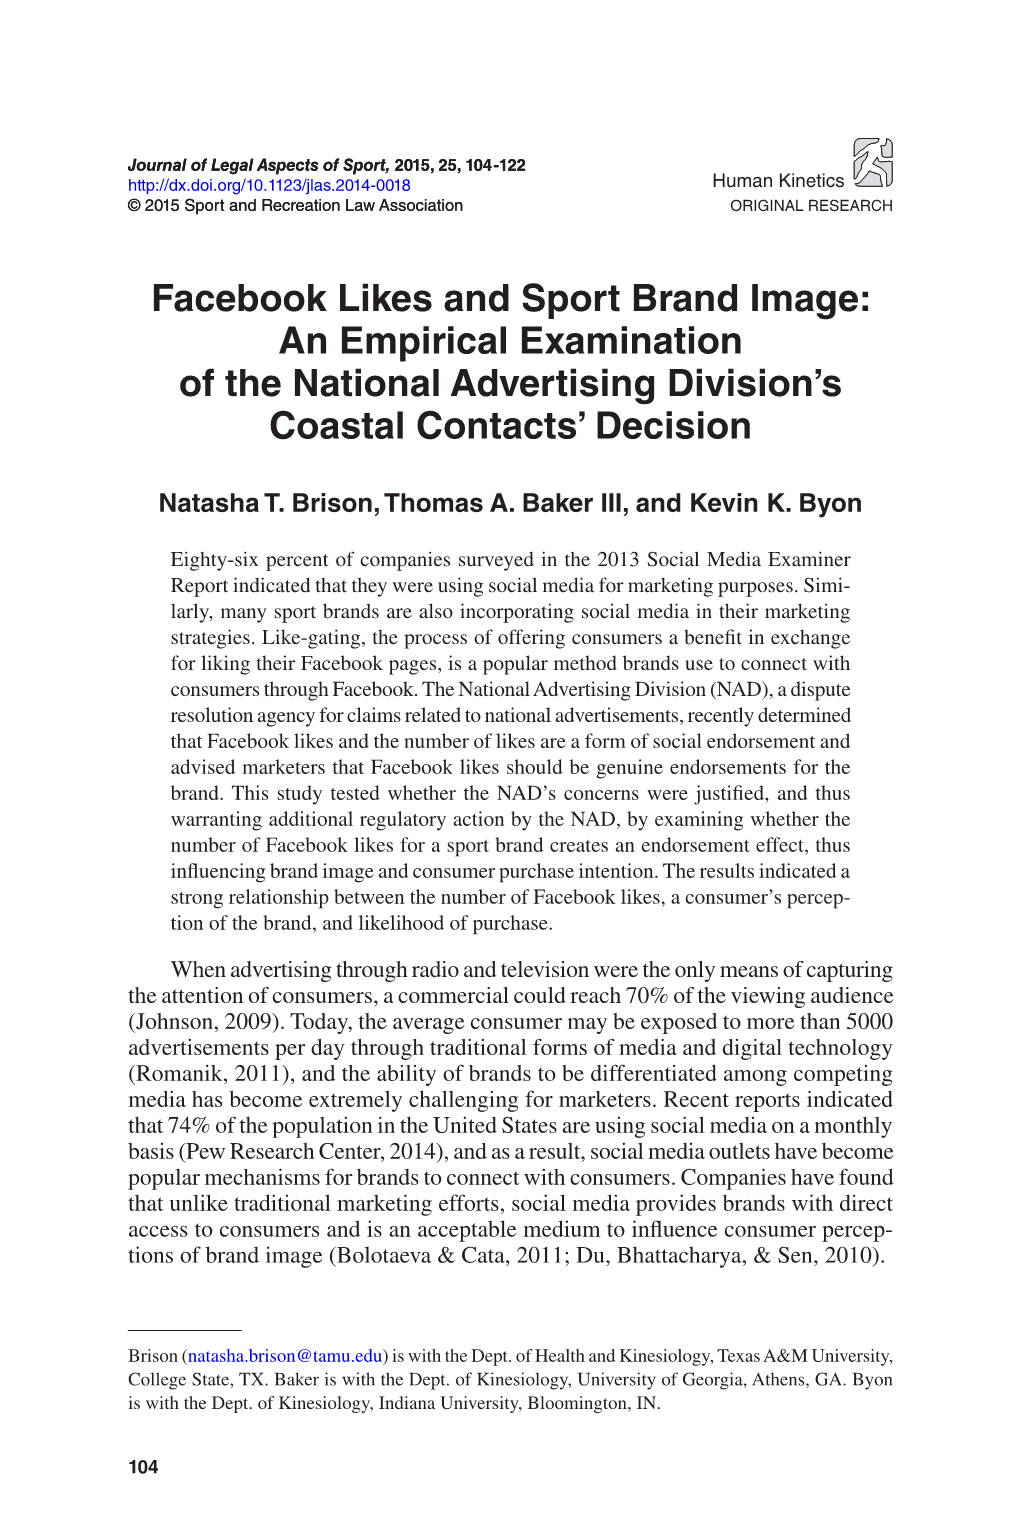 Facebook Likes and Sport Brand Image: an Empirical Examination of the National Advertising Division’S Coastal Contacts’ Decision